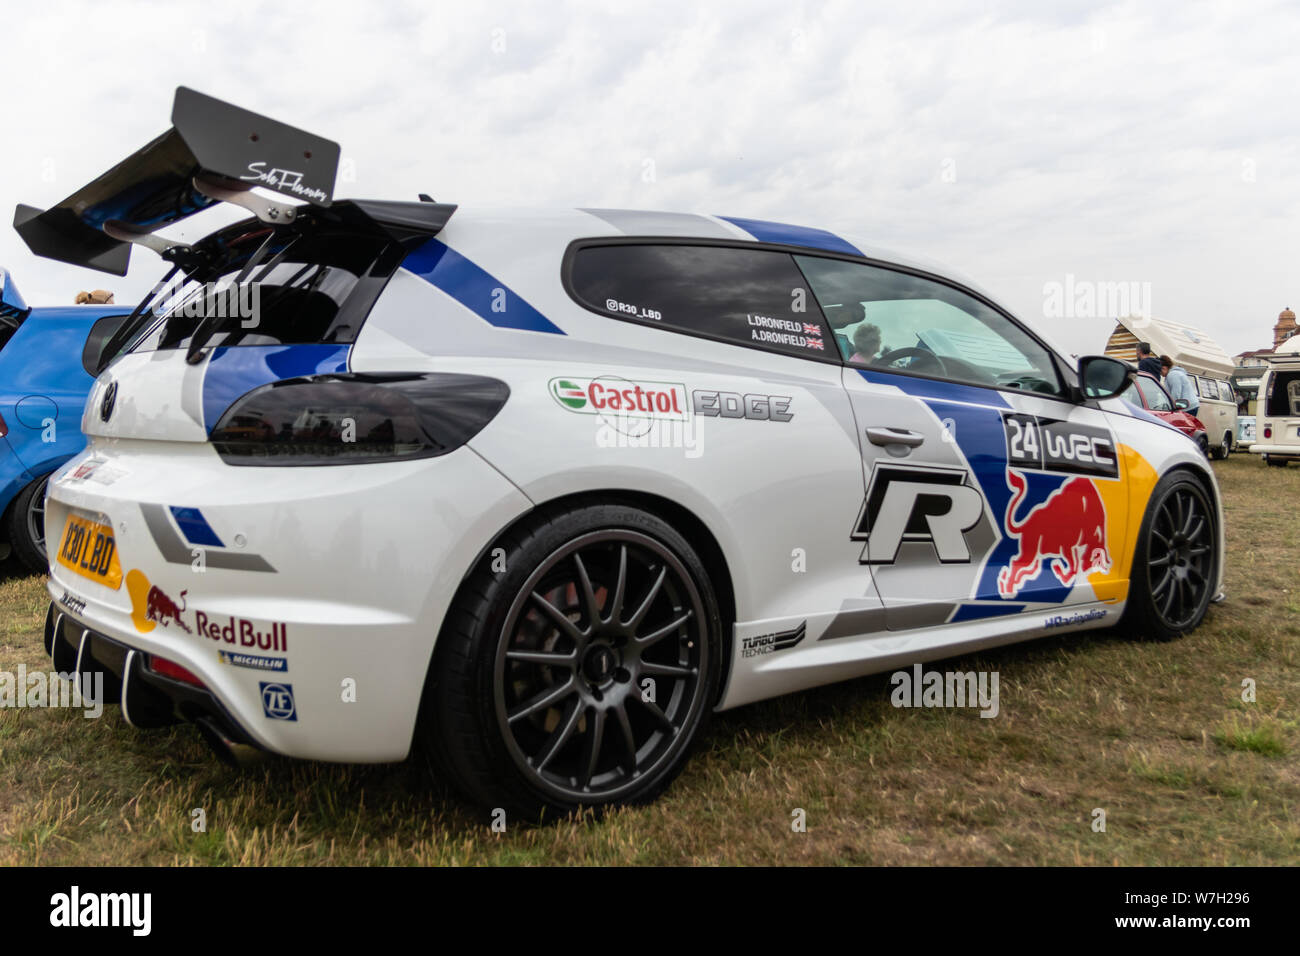 A Volkswagen or VW racing car at a car show decorated with sponsors names Stock Photo